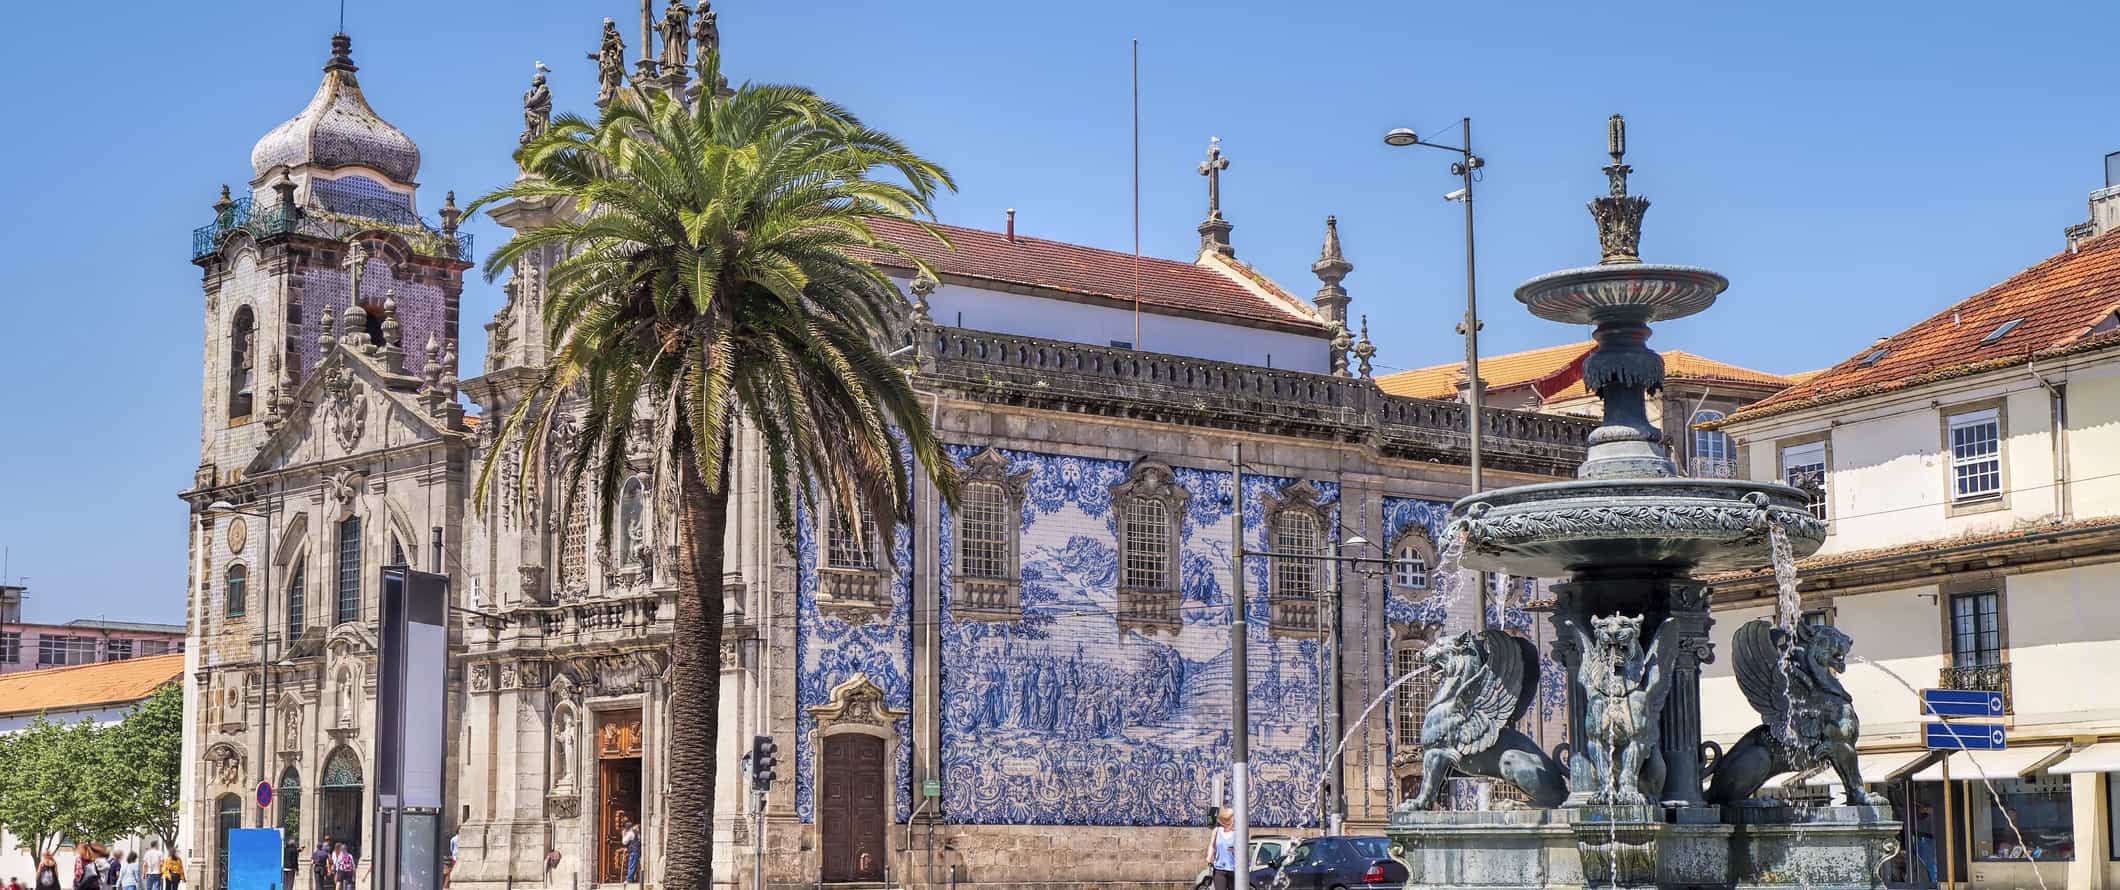 An iconic church in sunny Porto, Portugal with a fountain in the foreground